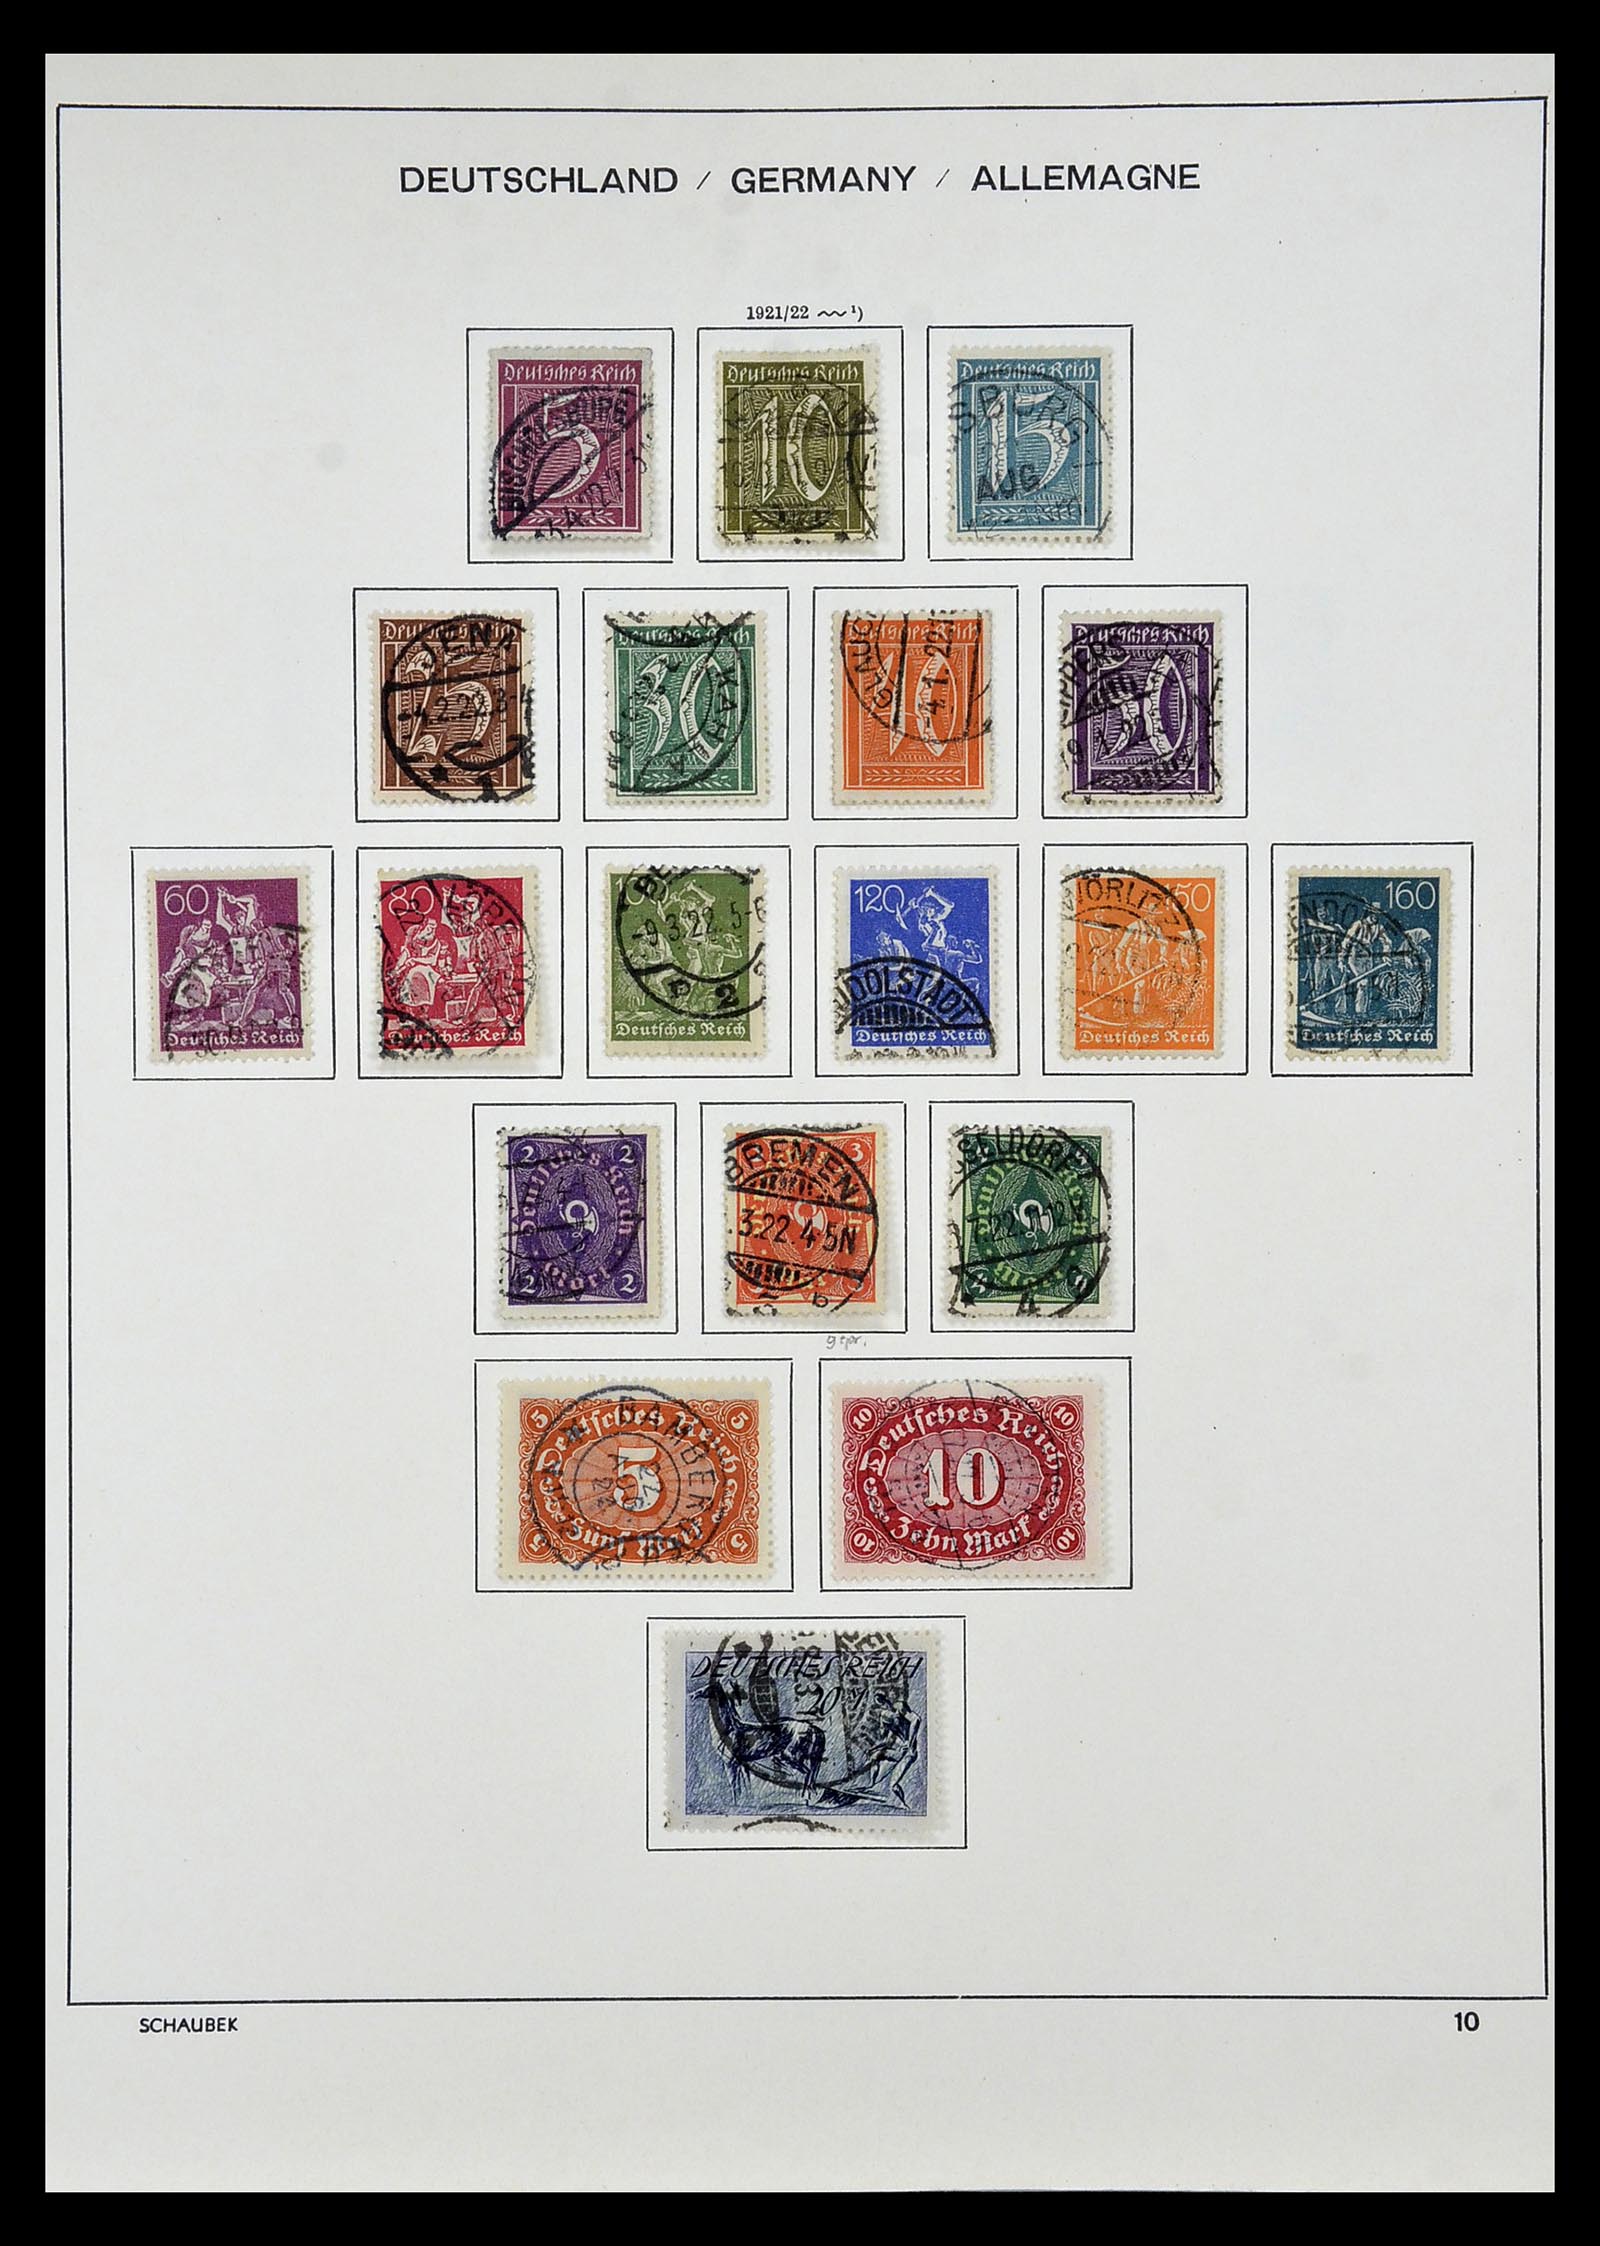 35006 004 - Stamp Collection 35006 German Reich infla 1919-1923.